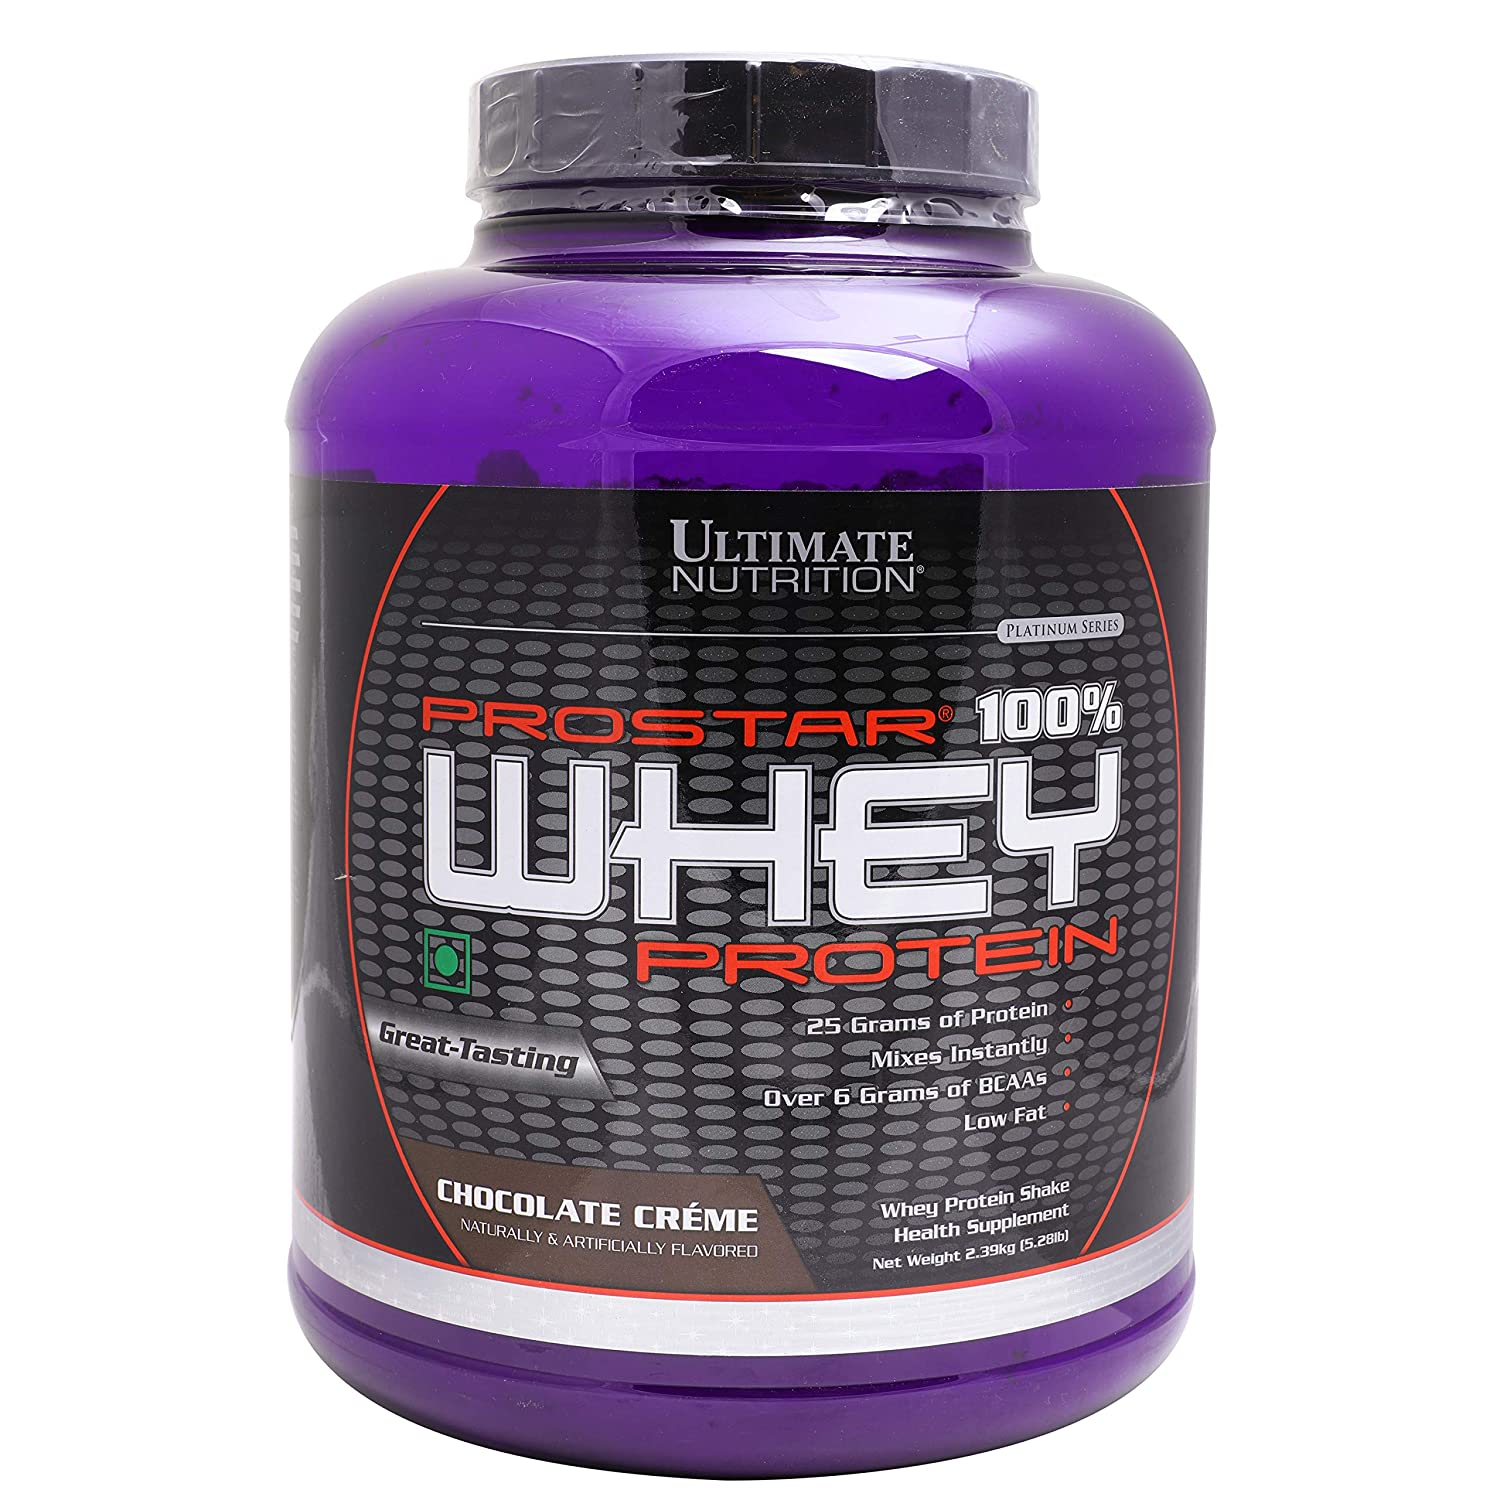 Ultimate Nutrition Prostar 100% Whey Protein. Протеин Prostar Whey Ultimate Nutrition. Протеин Ultimate Nutrition Prostar 100% Whey Protein, 2390 гр.. Протеин Ultimate Nutrition Prostar 100% Whey Protein 908.